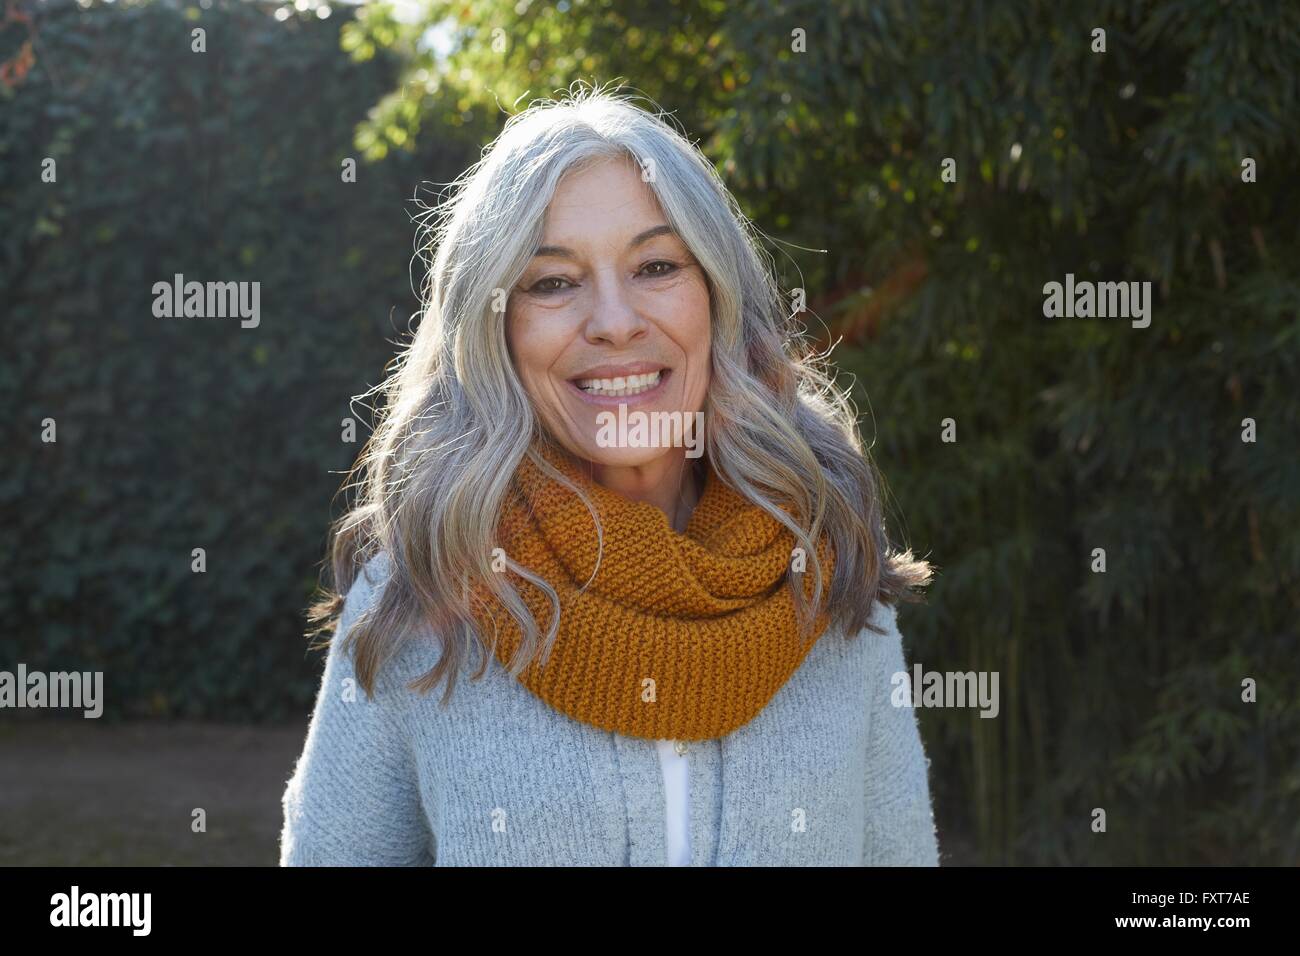 Portrait of woman with long gray hair looking at camera smiling Stock Photo